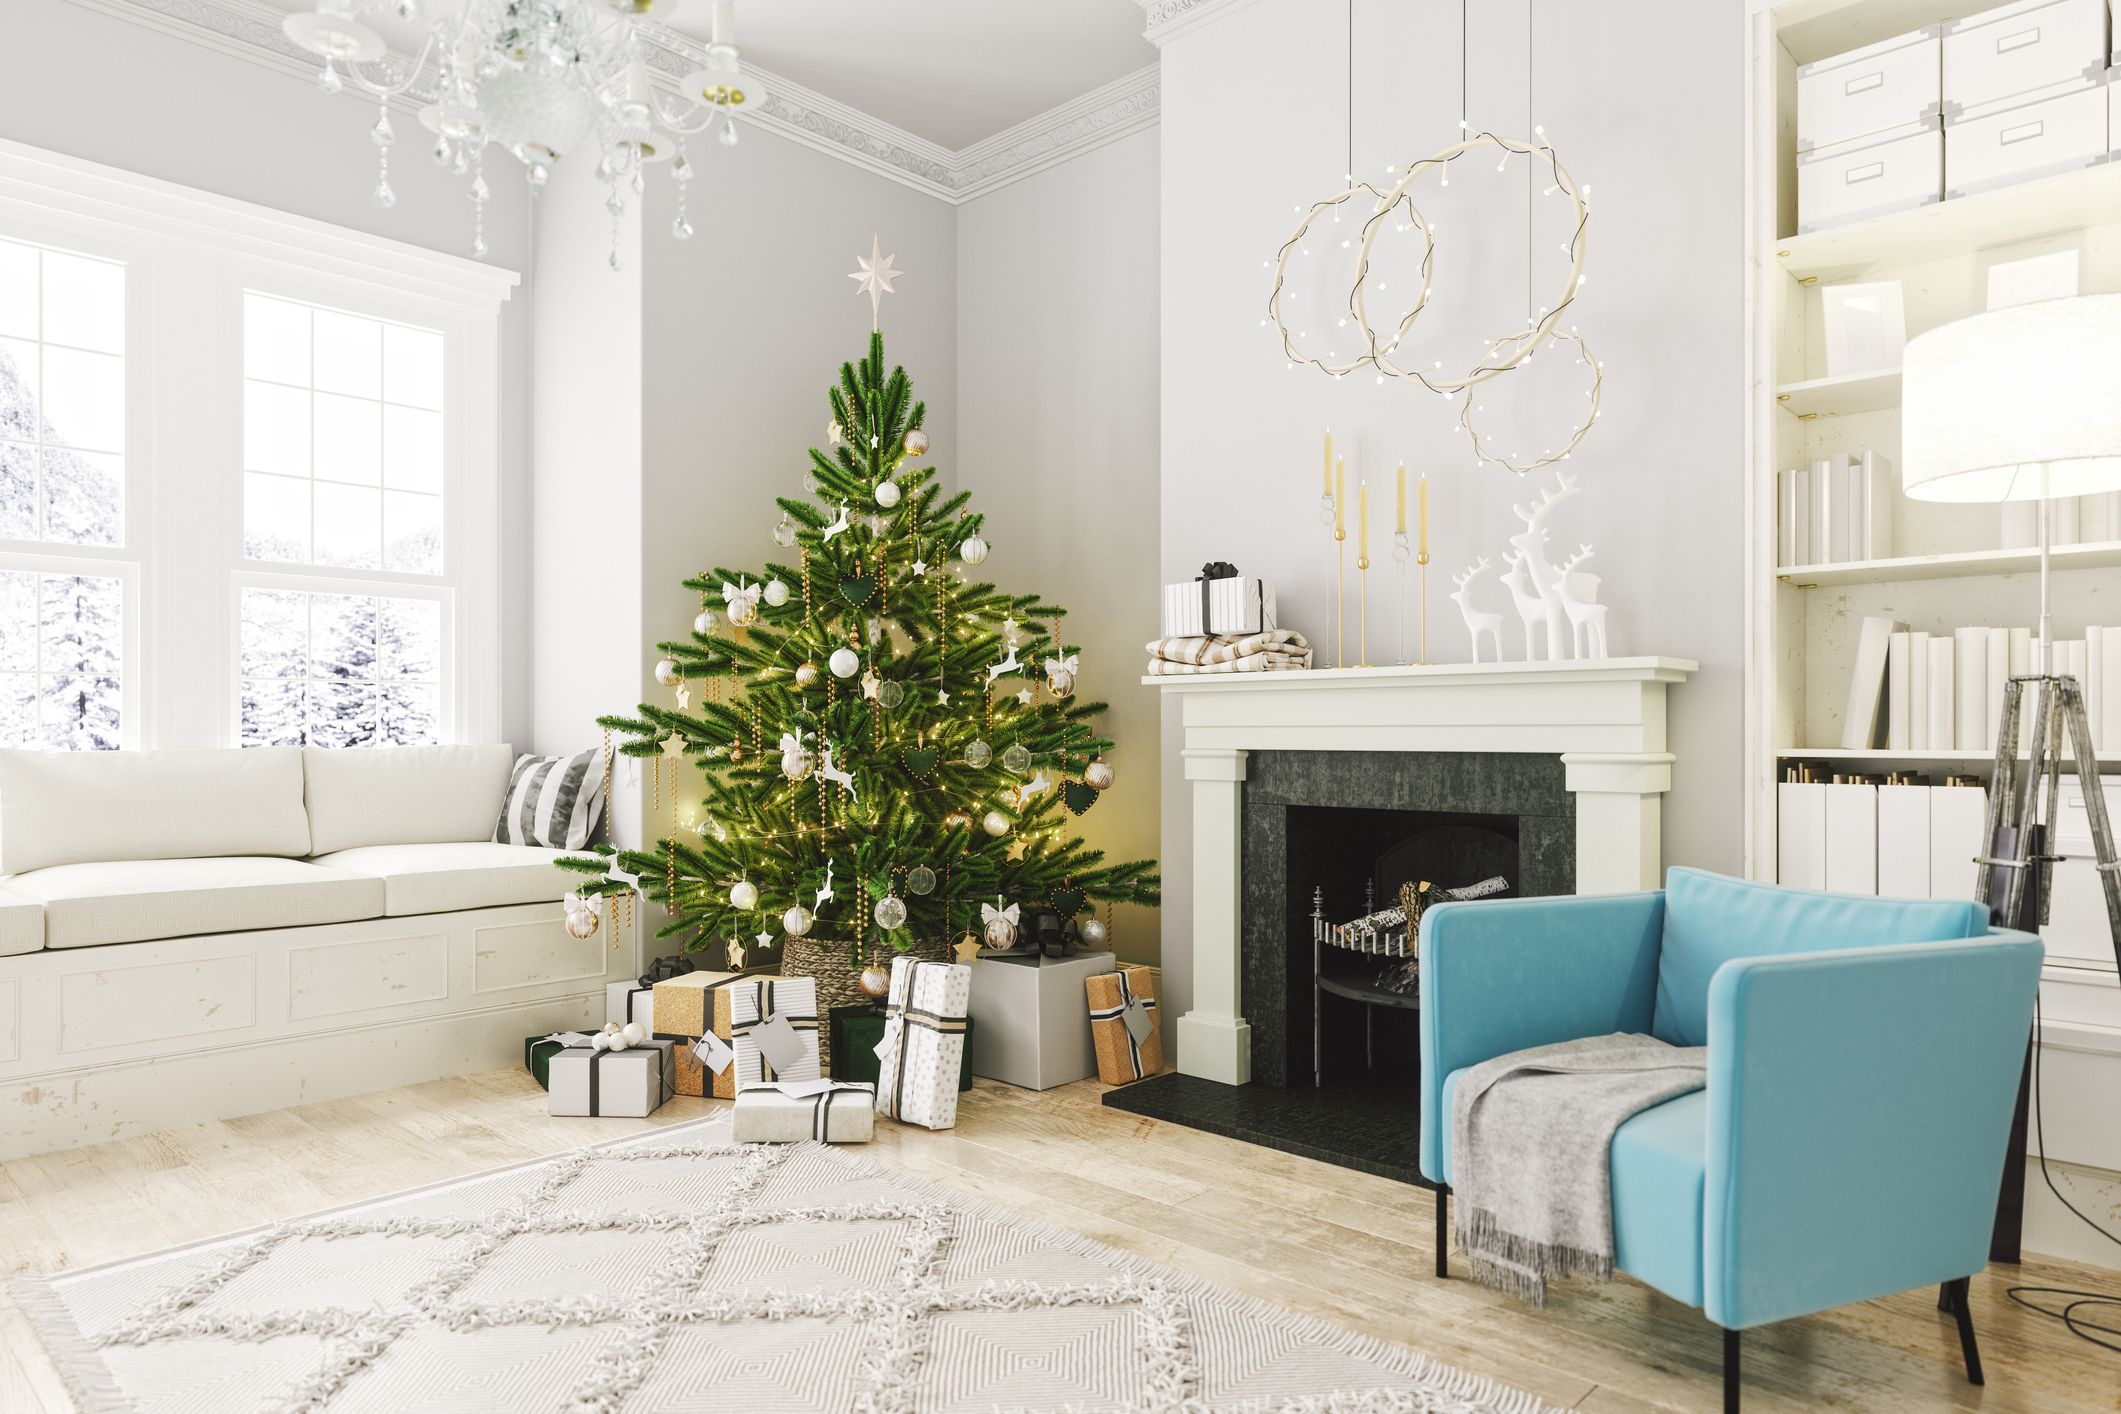 8 Expert Tips to Get Your Home Ready for the Holidays